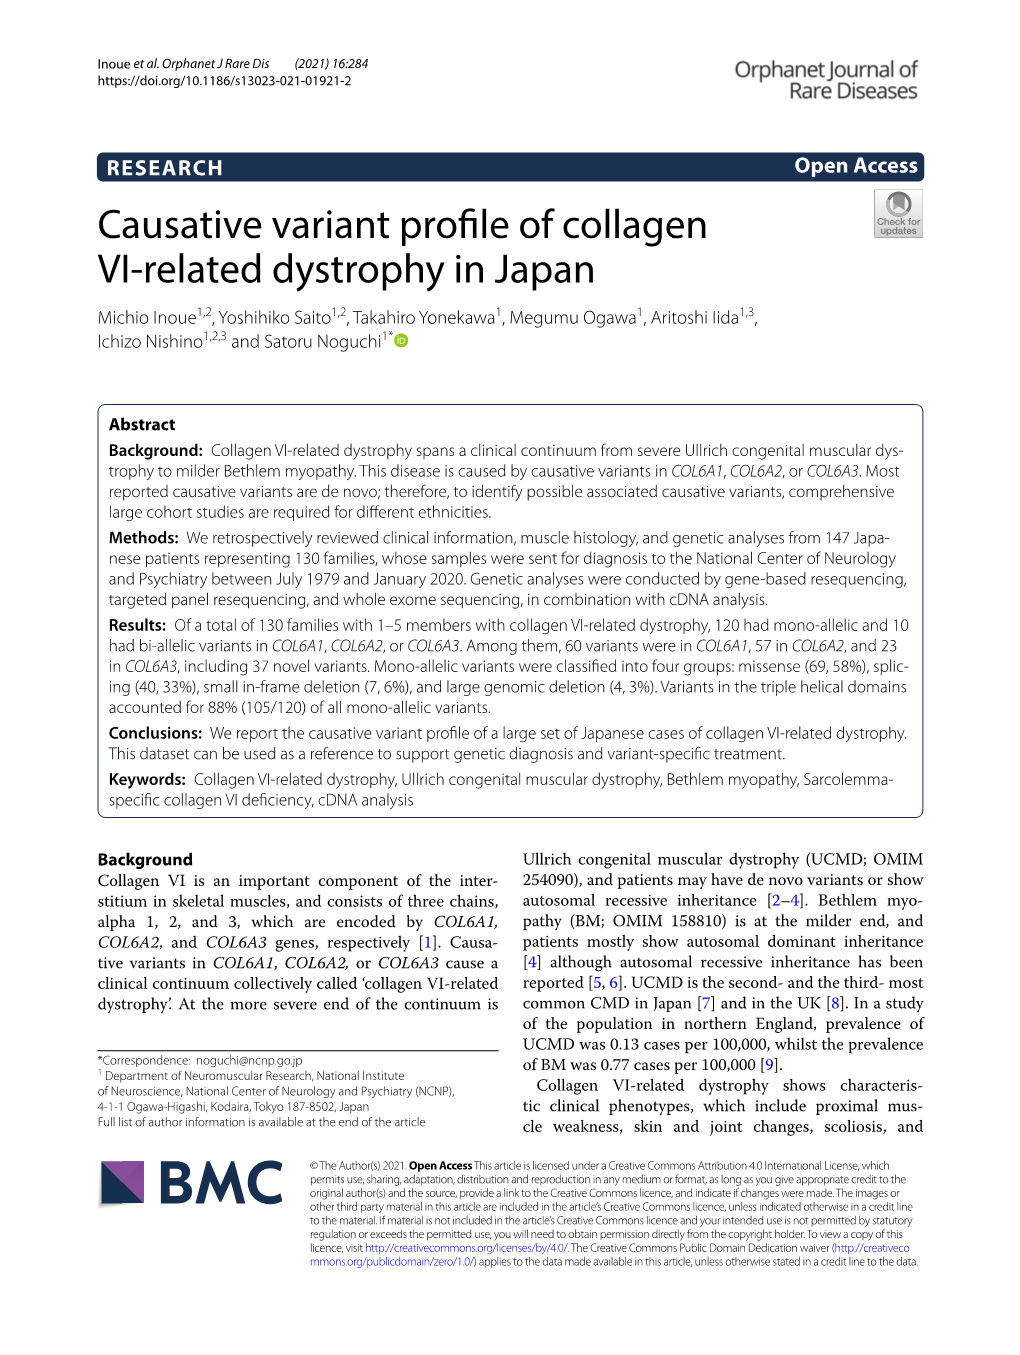 Causative Variant Profile of Collagen VI-Related Dystrophy in Japan